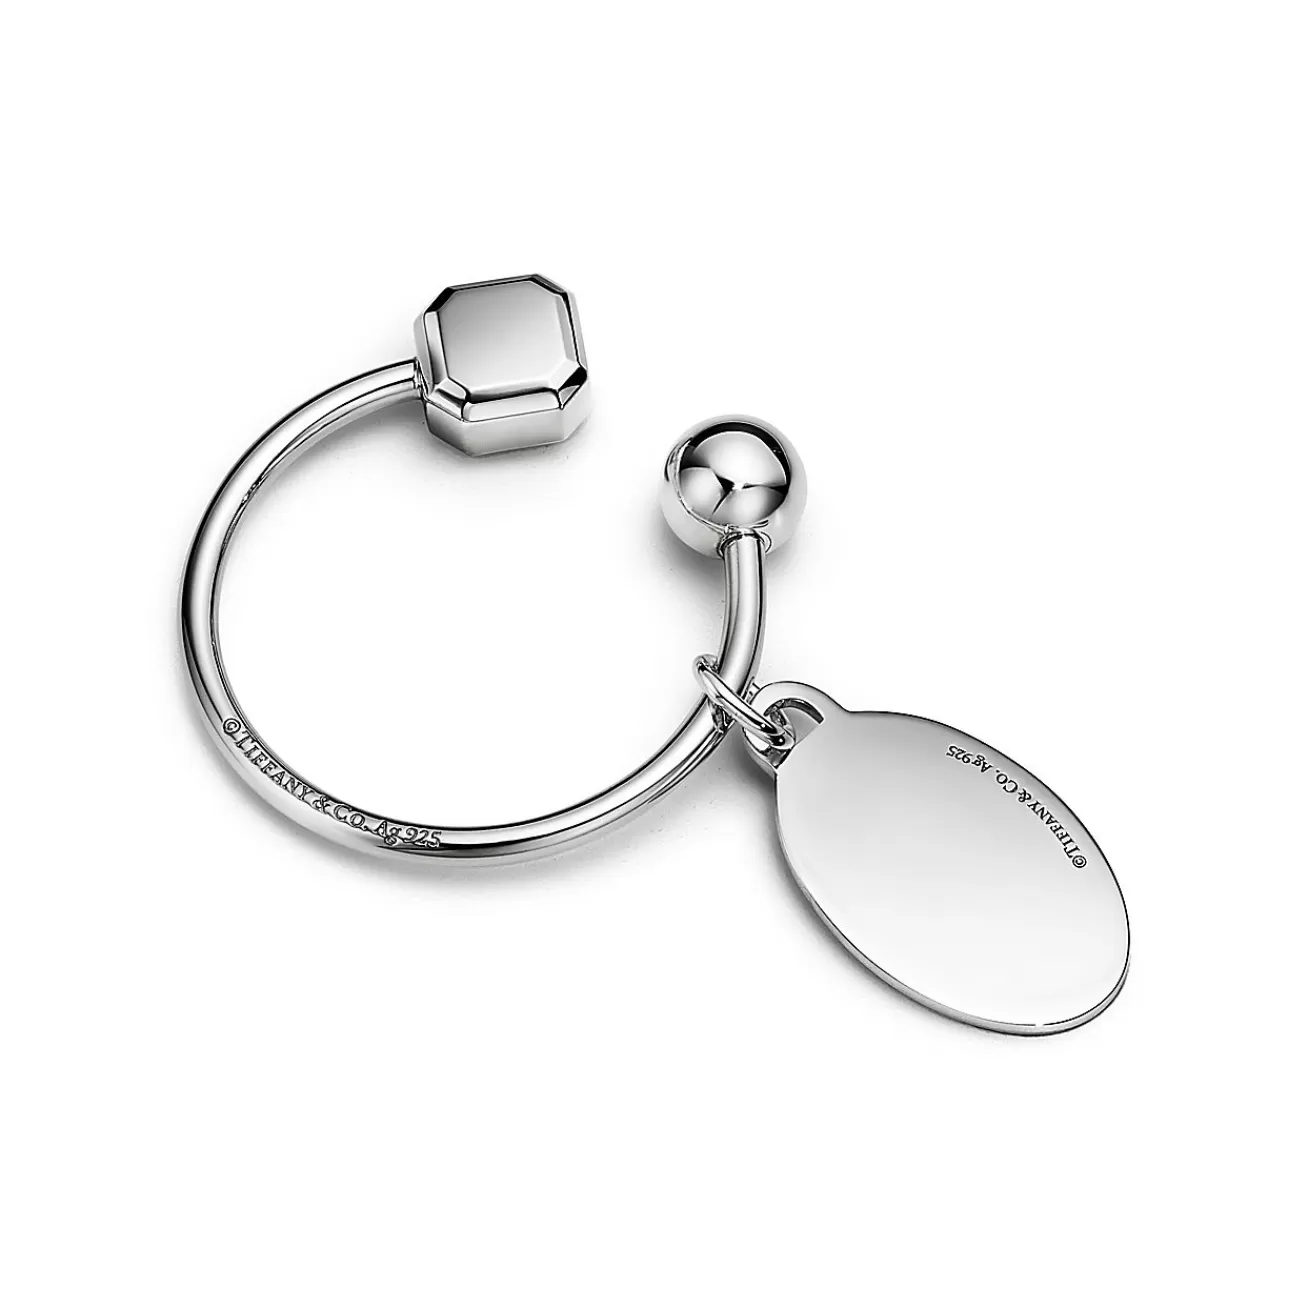 Tiffany & Co. Return to Tiffany® Oval Tag Screwball Key Ring in Sterling Silver | ^Women Business Gifts | Key Rings